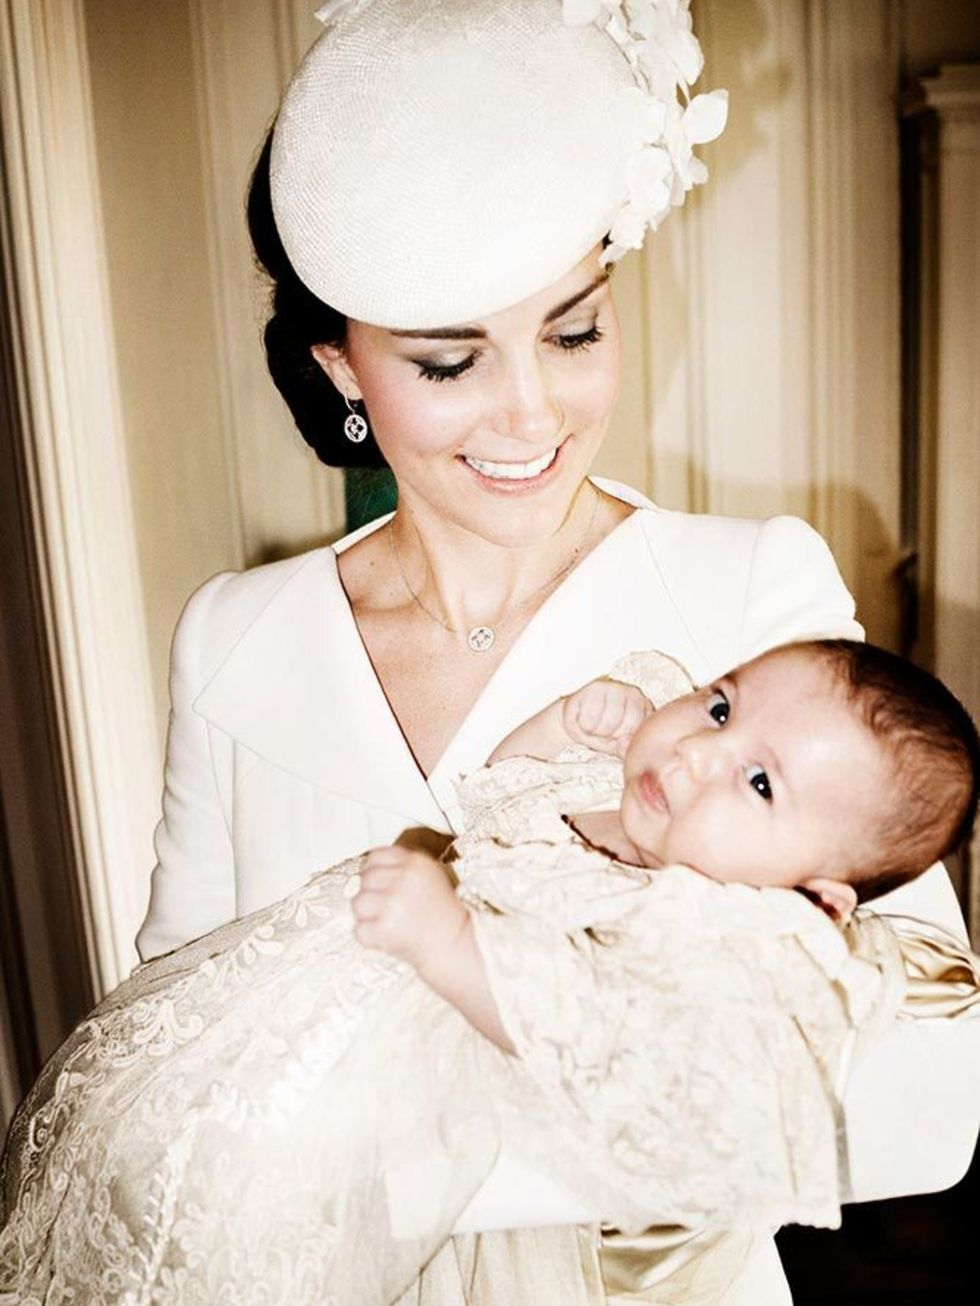 Kate and Charlotte in an official portrait by Mario Testino.